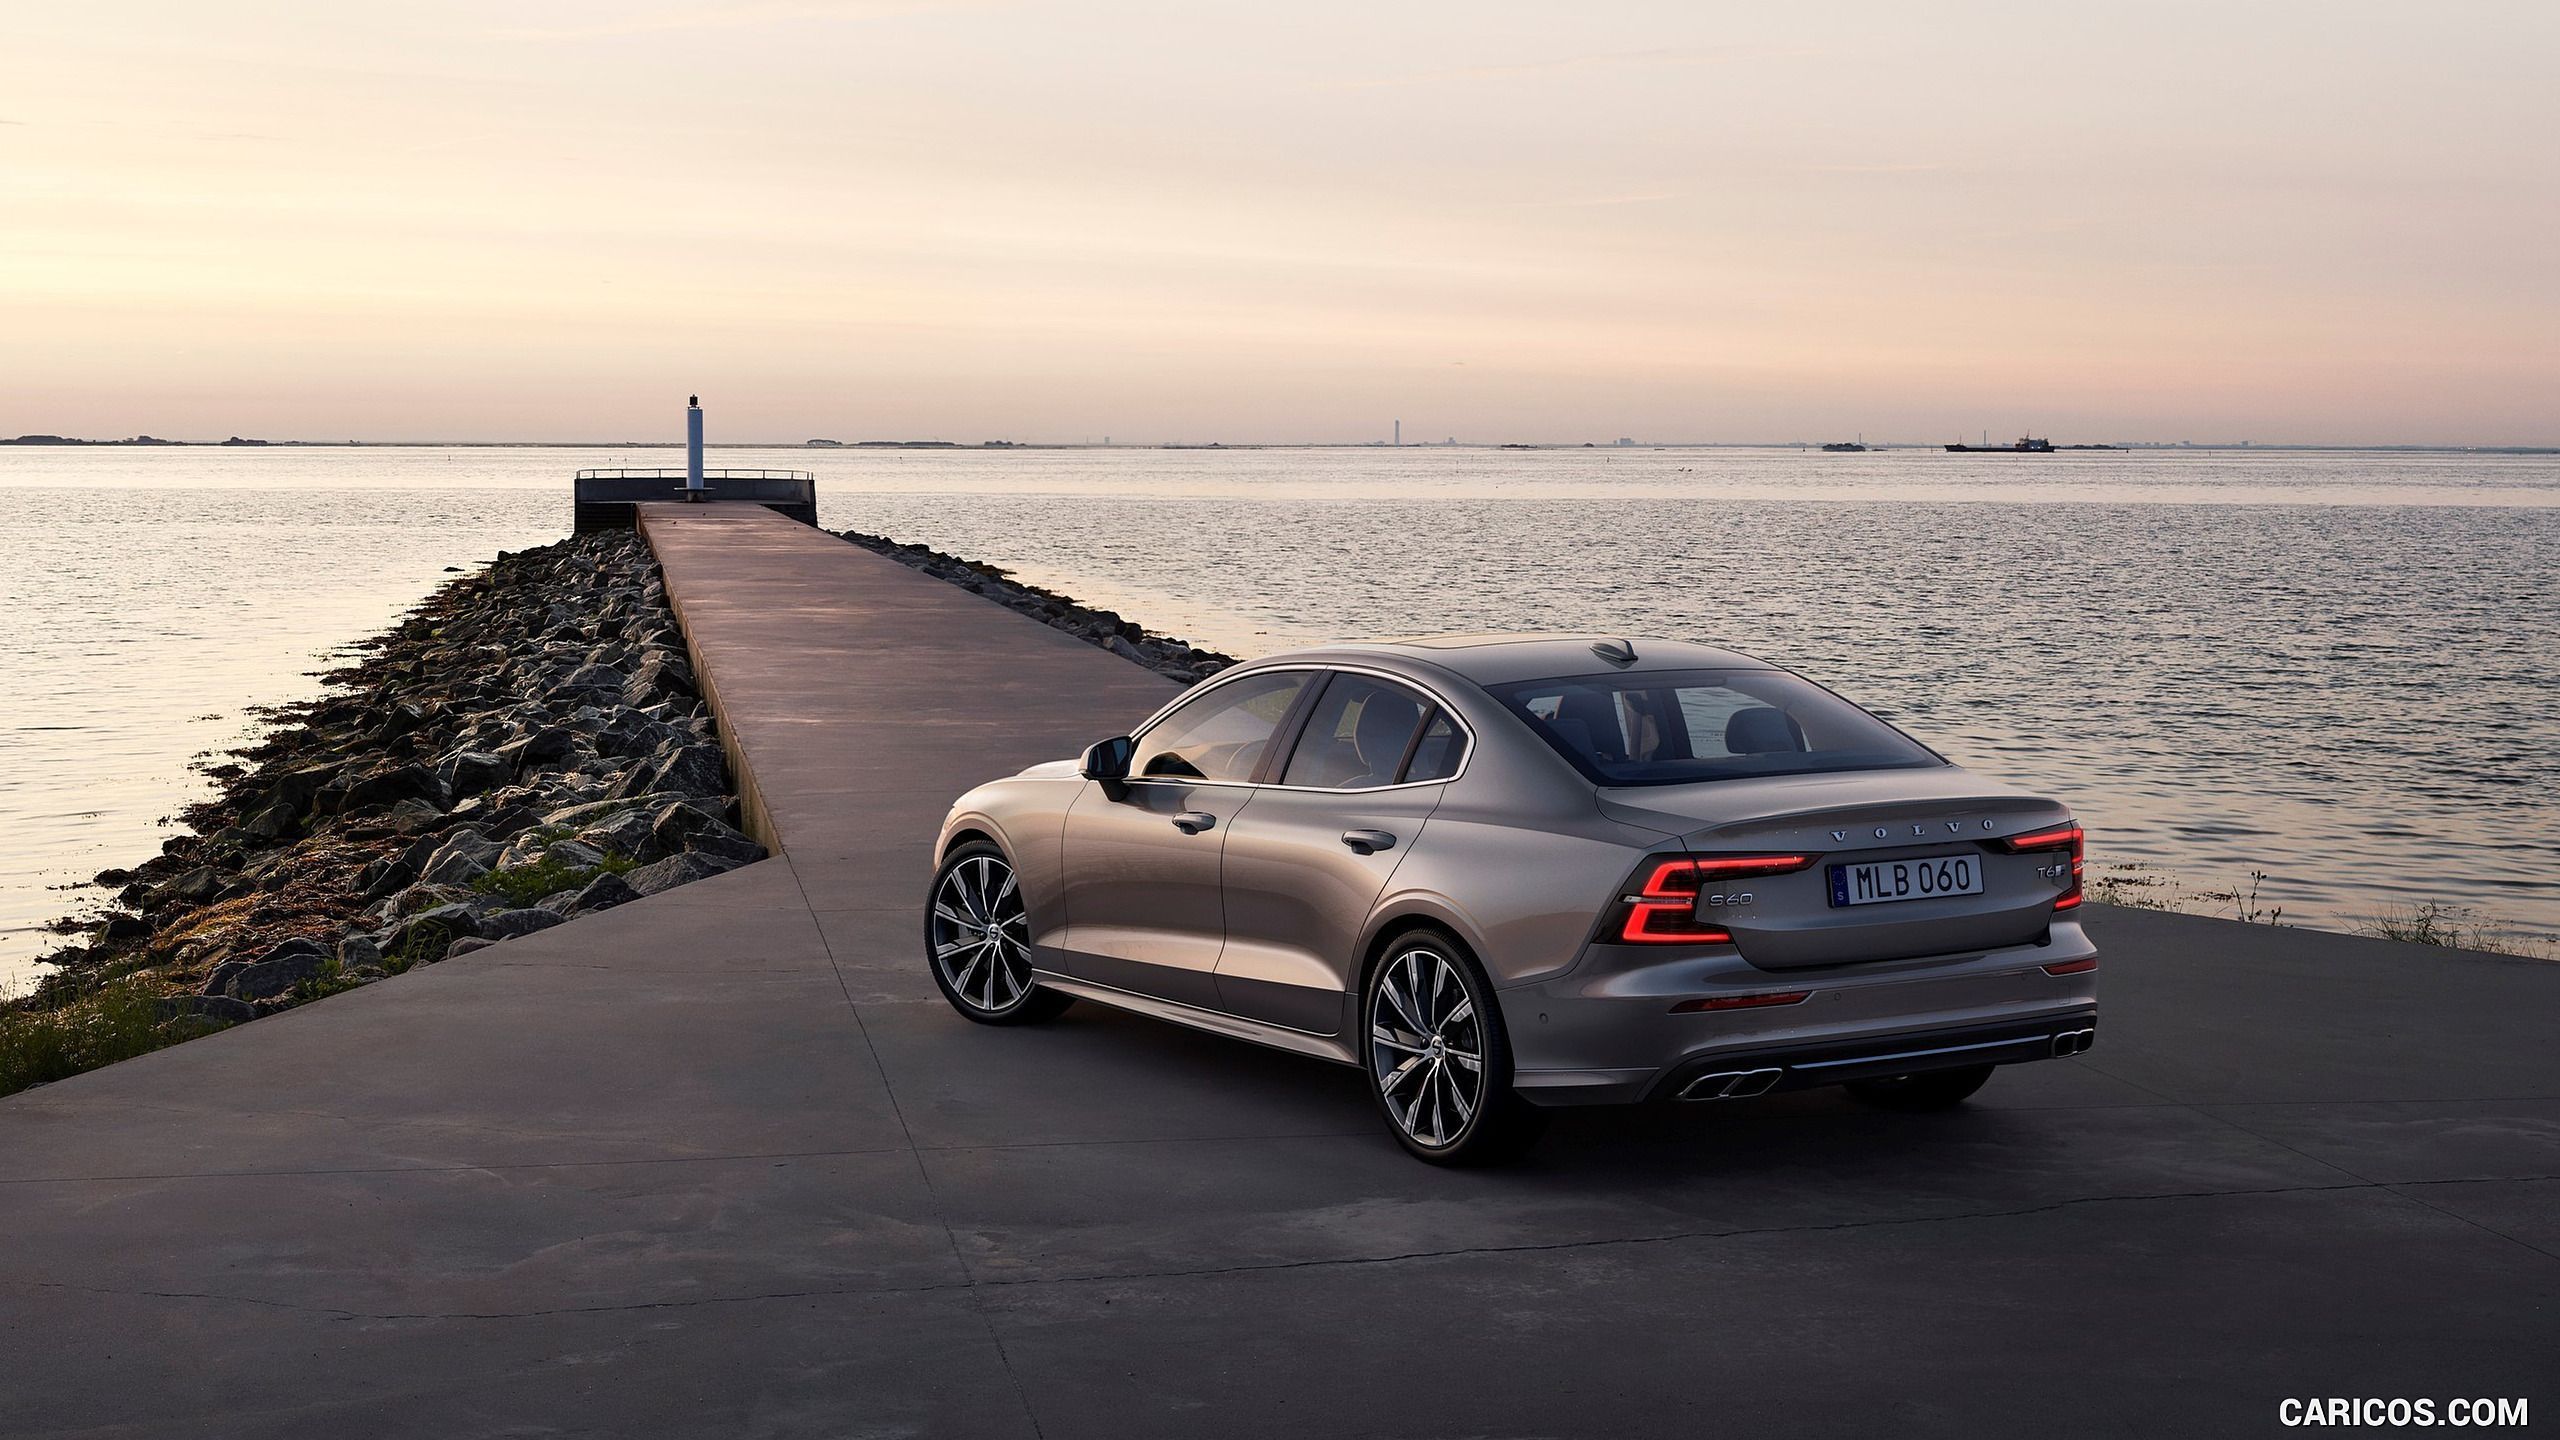 Volvo S60 Wallpapers Wallpaper Cave